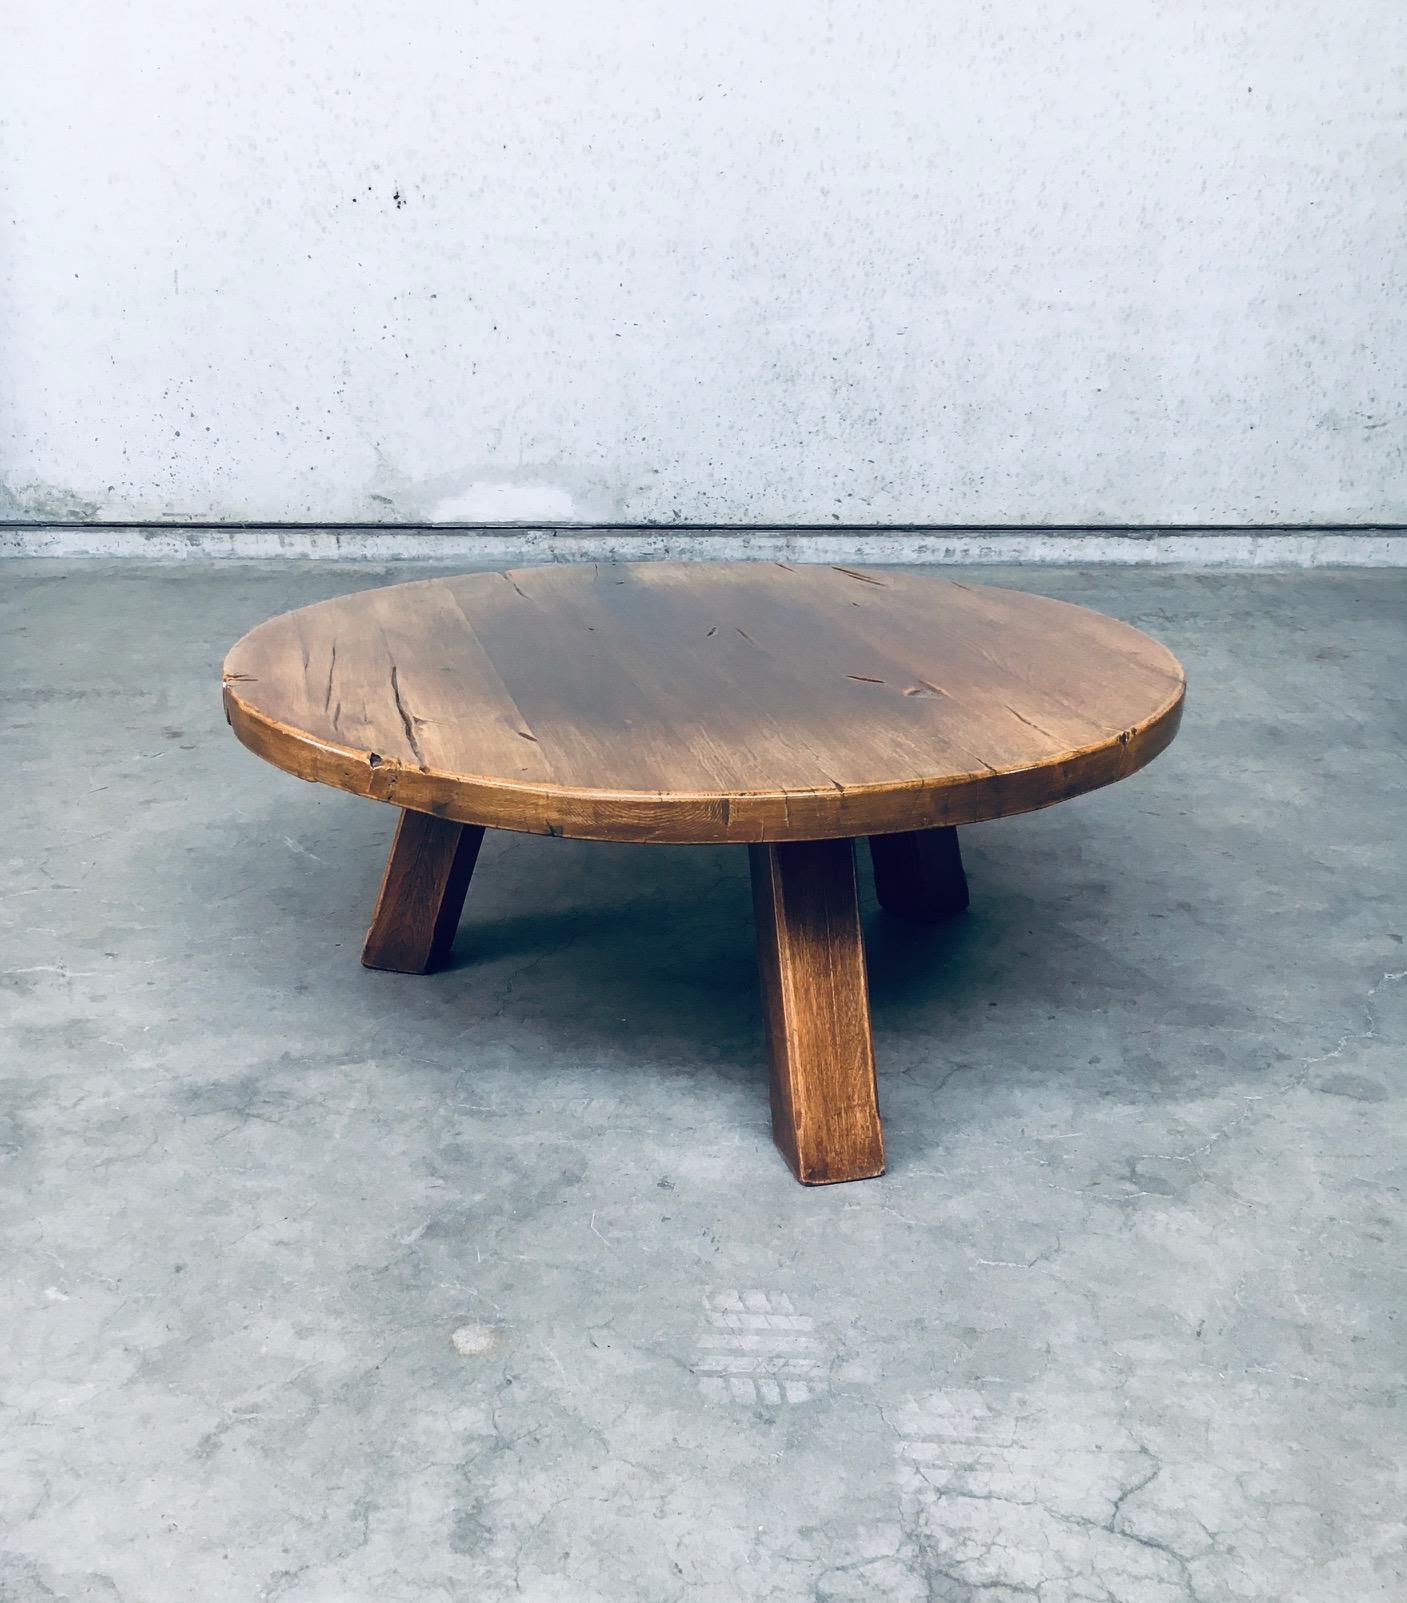 Vintage Midcentury Brutalist Design Wabi Sabi Style Oak Coffee Table. Made in France, 1960's. Round solid oak top on solid oak tripod legs. Comes in good condition with minor wear from it's age and use. Measures 44.5cm x 109cm x 109cm.